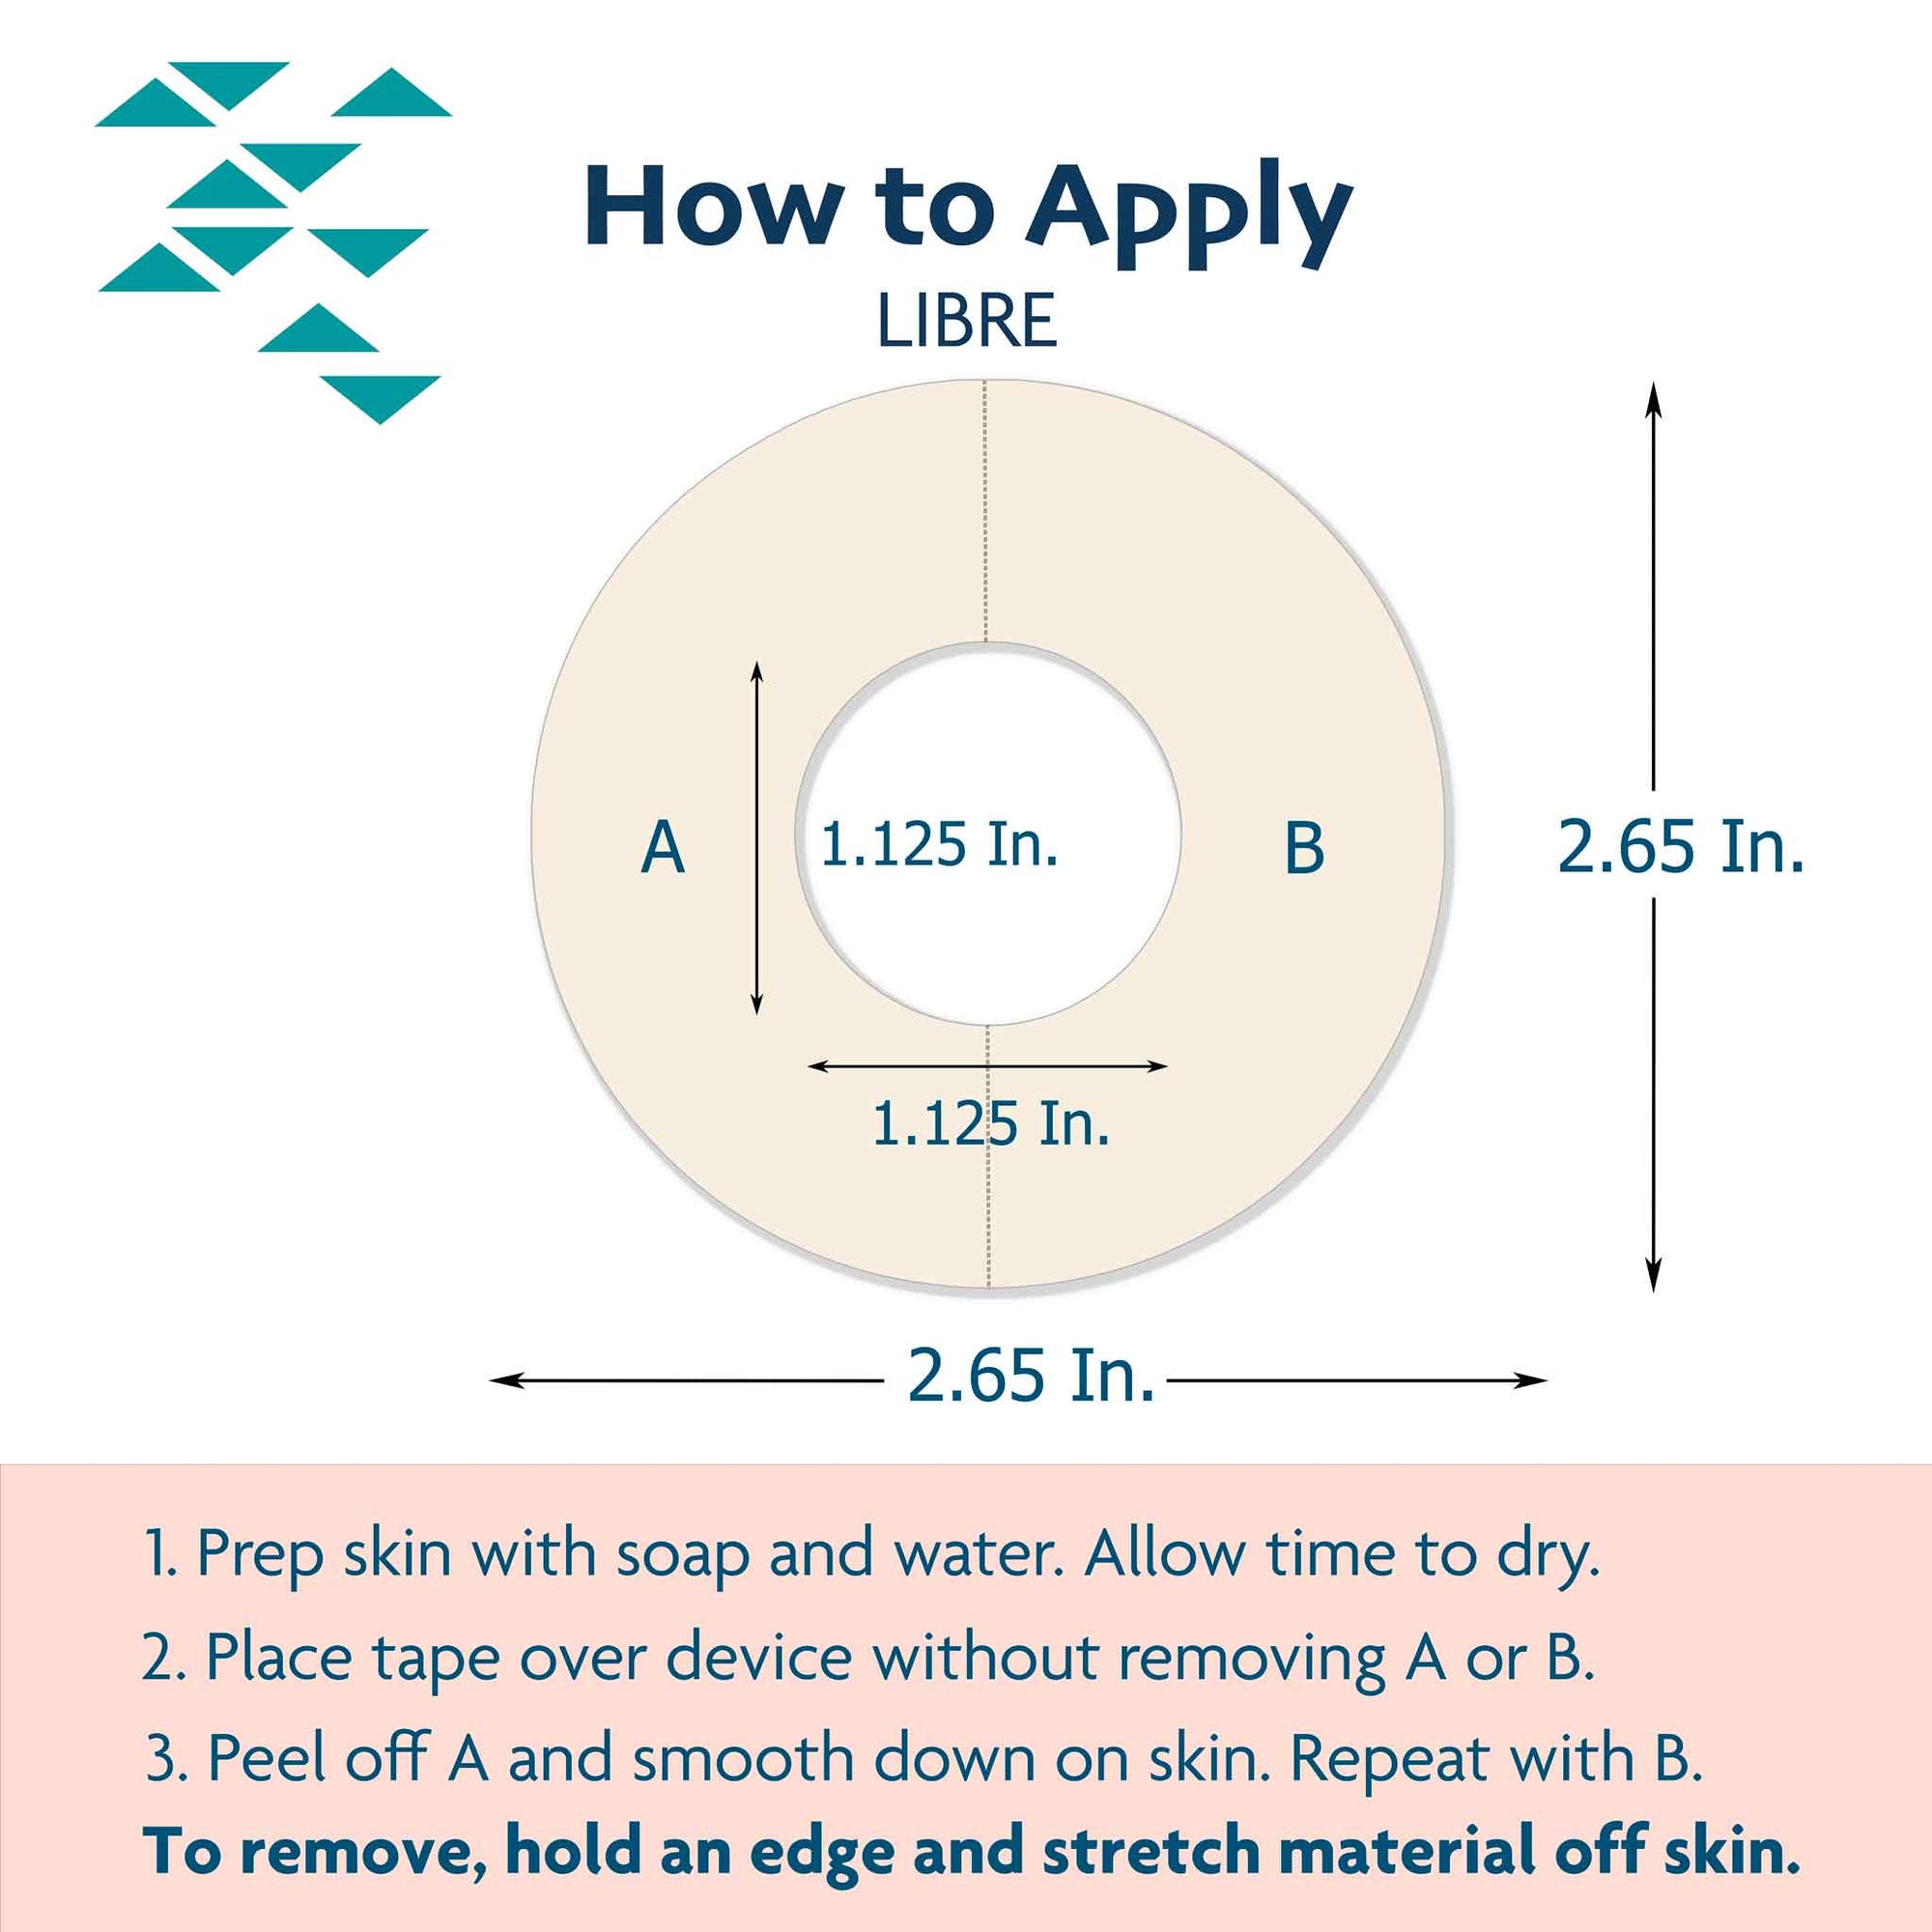 ExpressionMed Instructions to apply adhesives onto libre freestyle infusion site